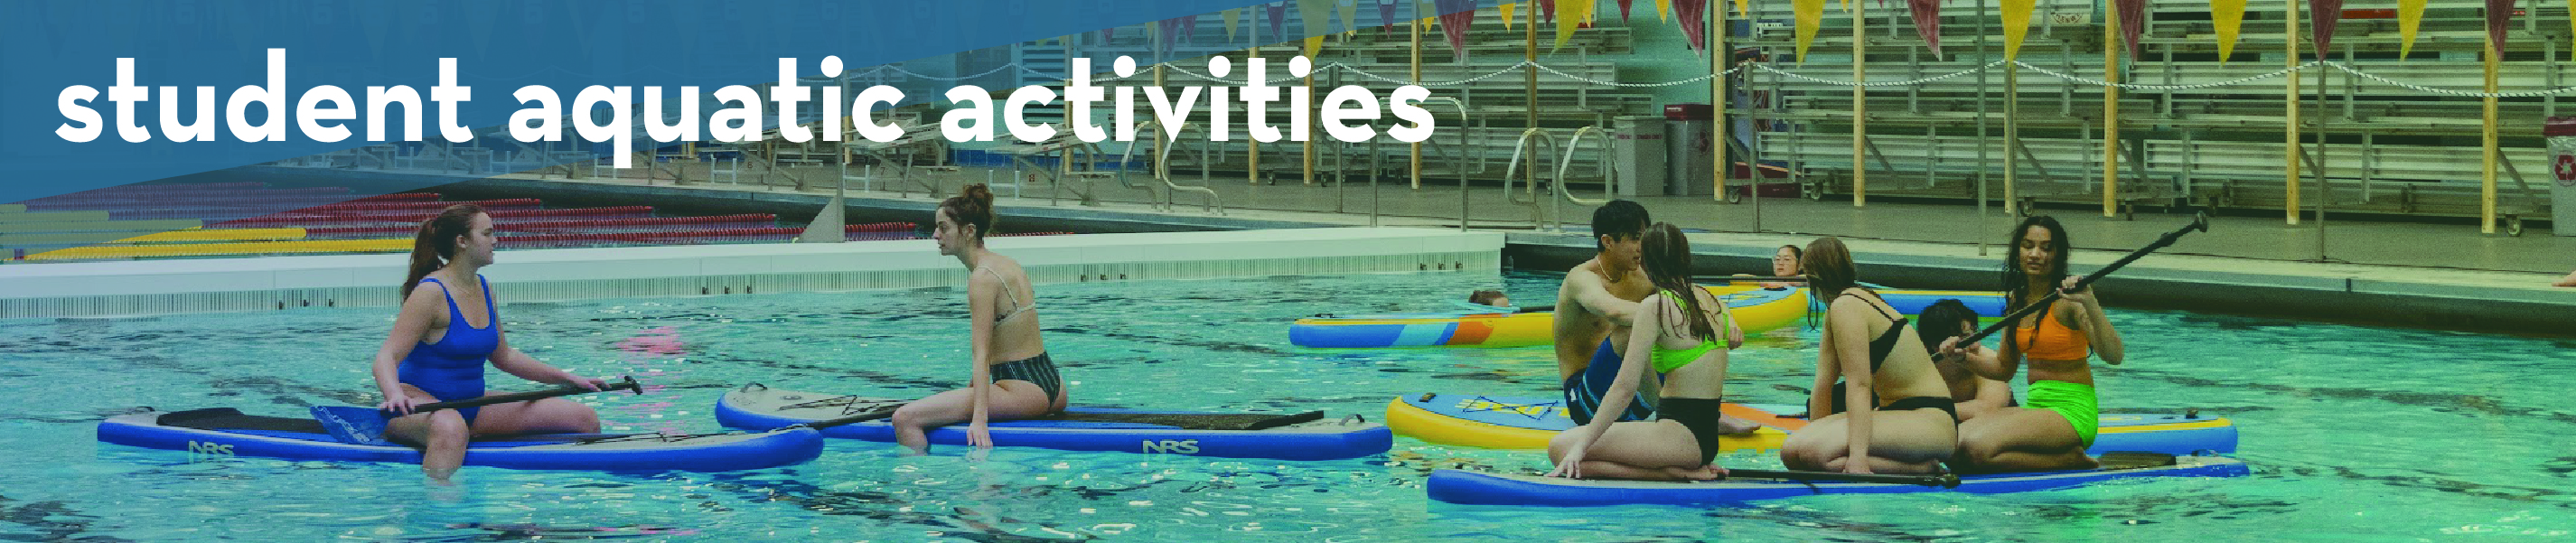 Students in pool on paddle boards with text "Student Aquatic Activities"